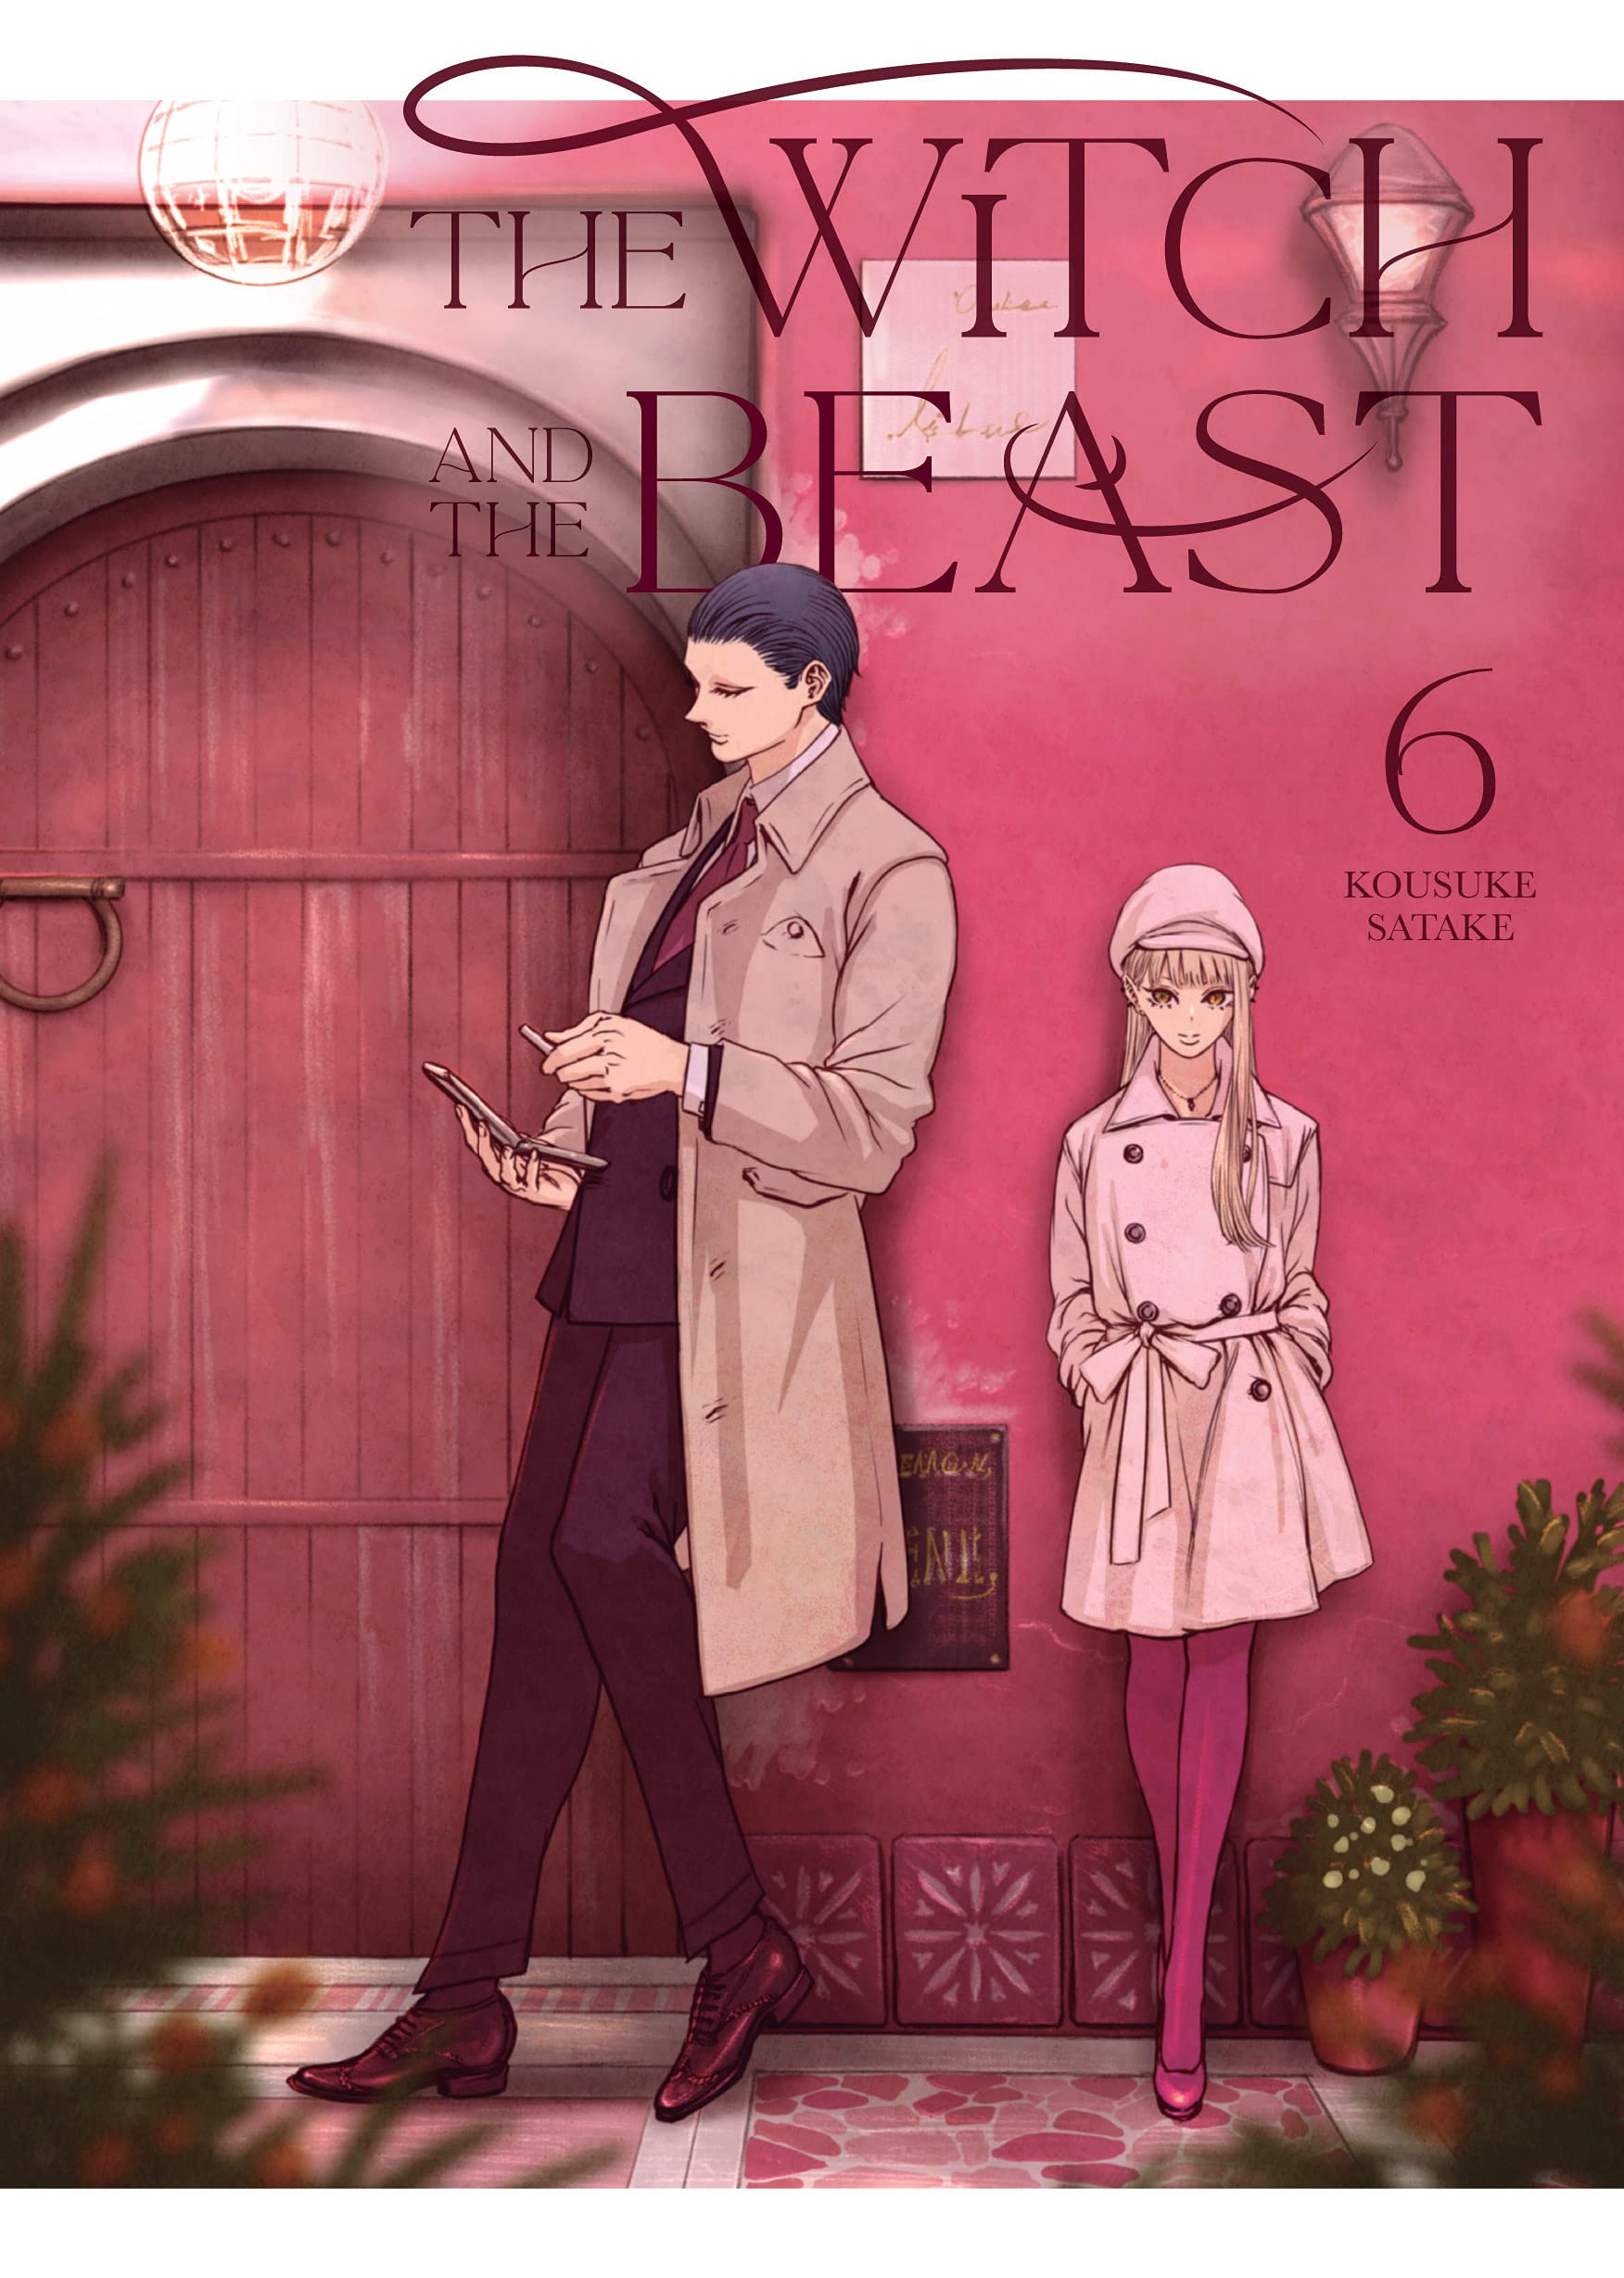 The Witch and the Beast - Volume 6